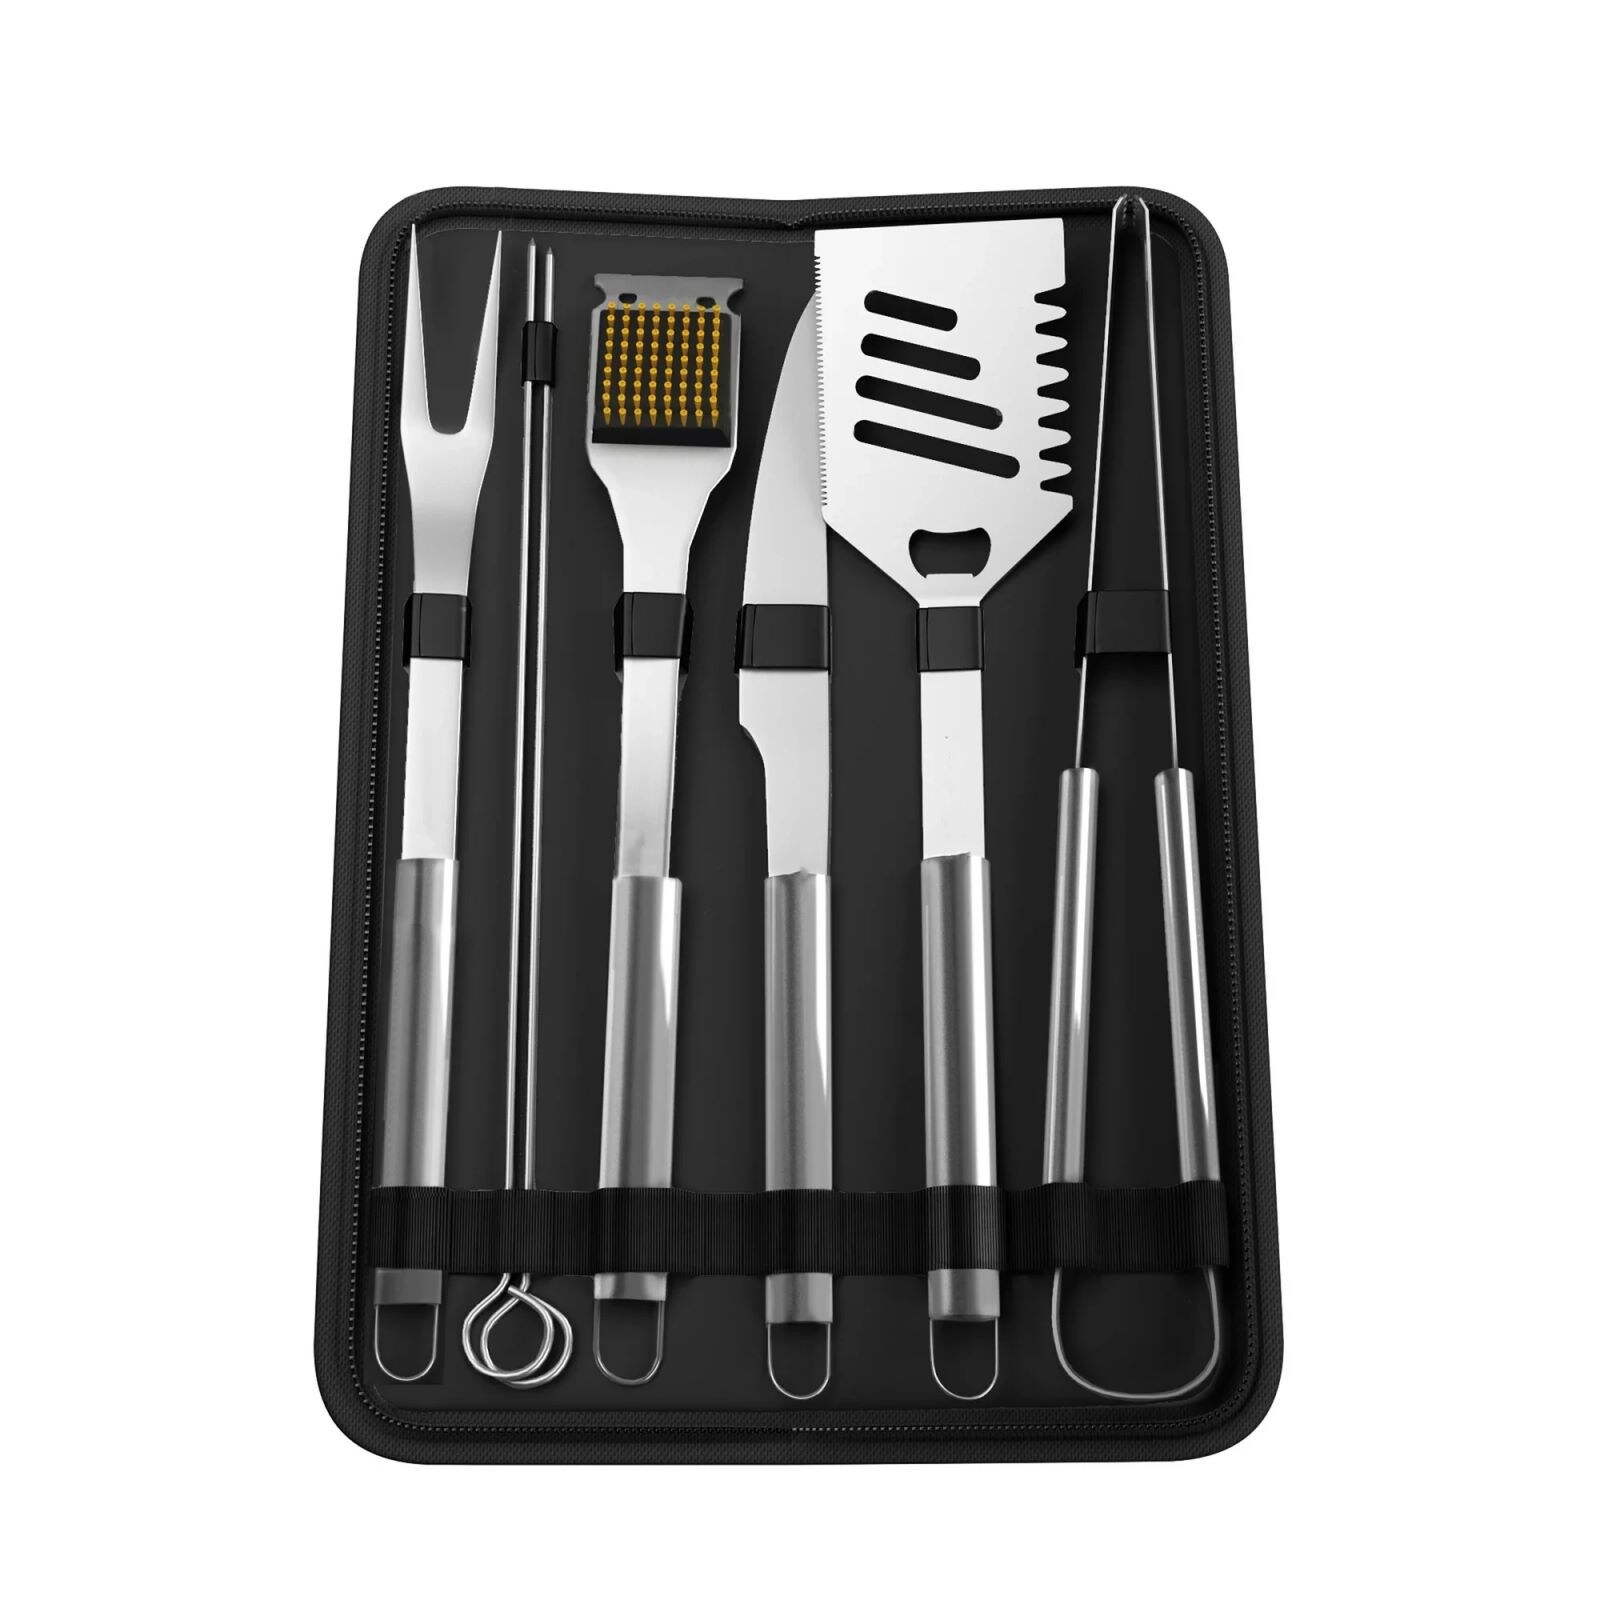 https://ak1.ostkcdn.com/images/products/is/images/direct/44368456d2ba6408e95d7434990de7987439596b/BBQ-Grill-Tool-Set%2C-Stainless-Steel-Barbecue-Grilling-Accessories.jpg